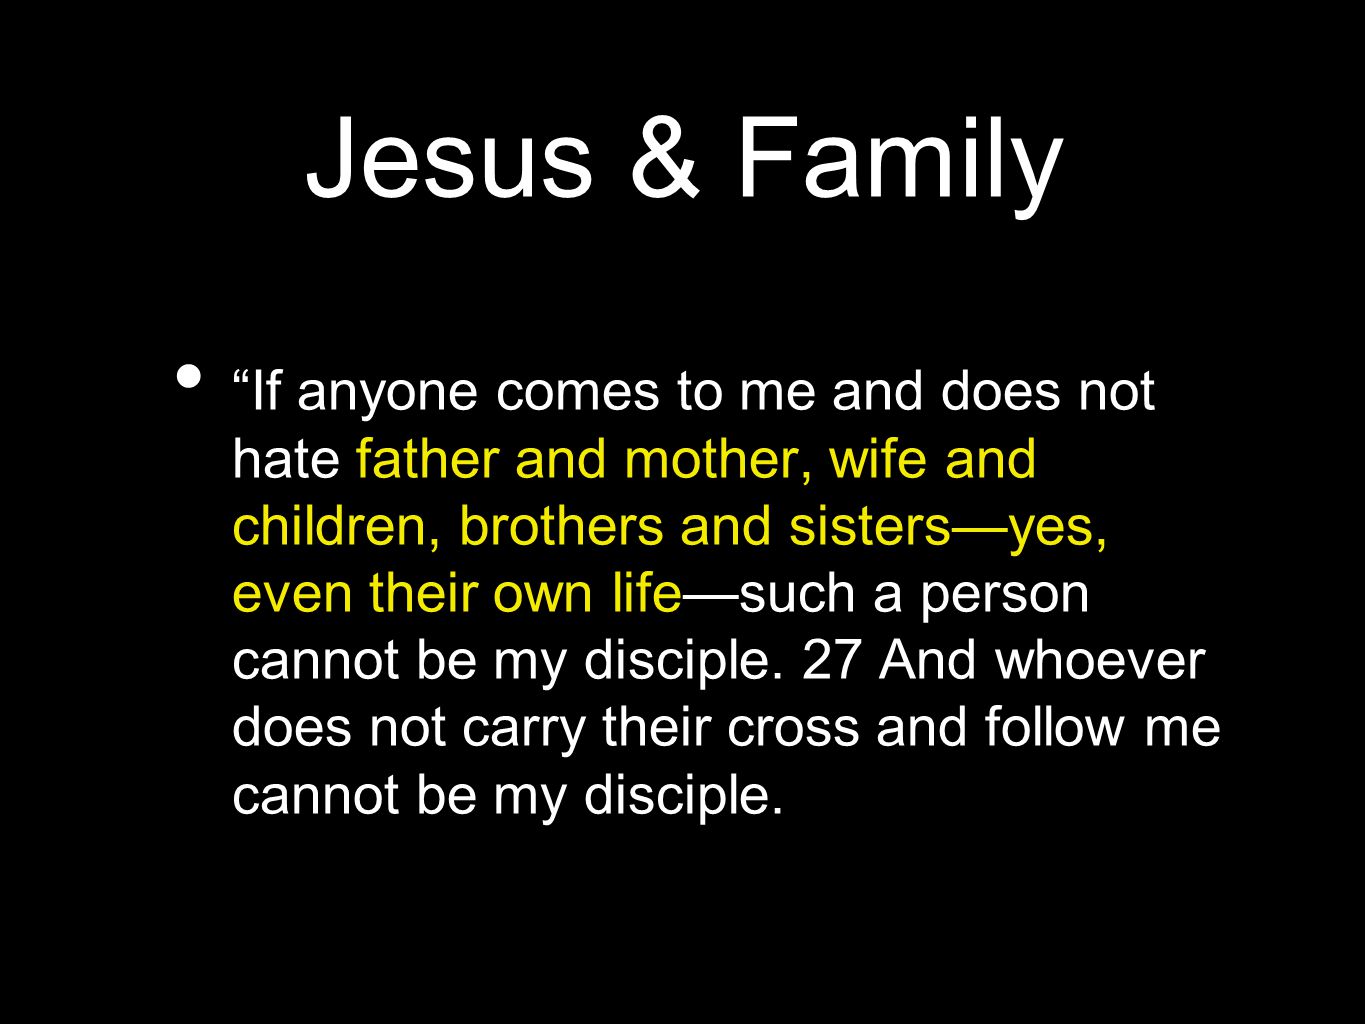 Jesus & Family If anyone comes to me and does not hate father and mother, wife and children, brothers and sisters—yes, even their own life—such a person cannot be my disciple.